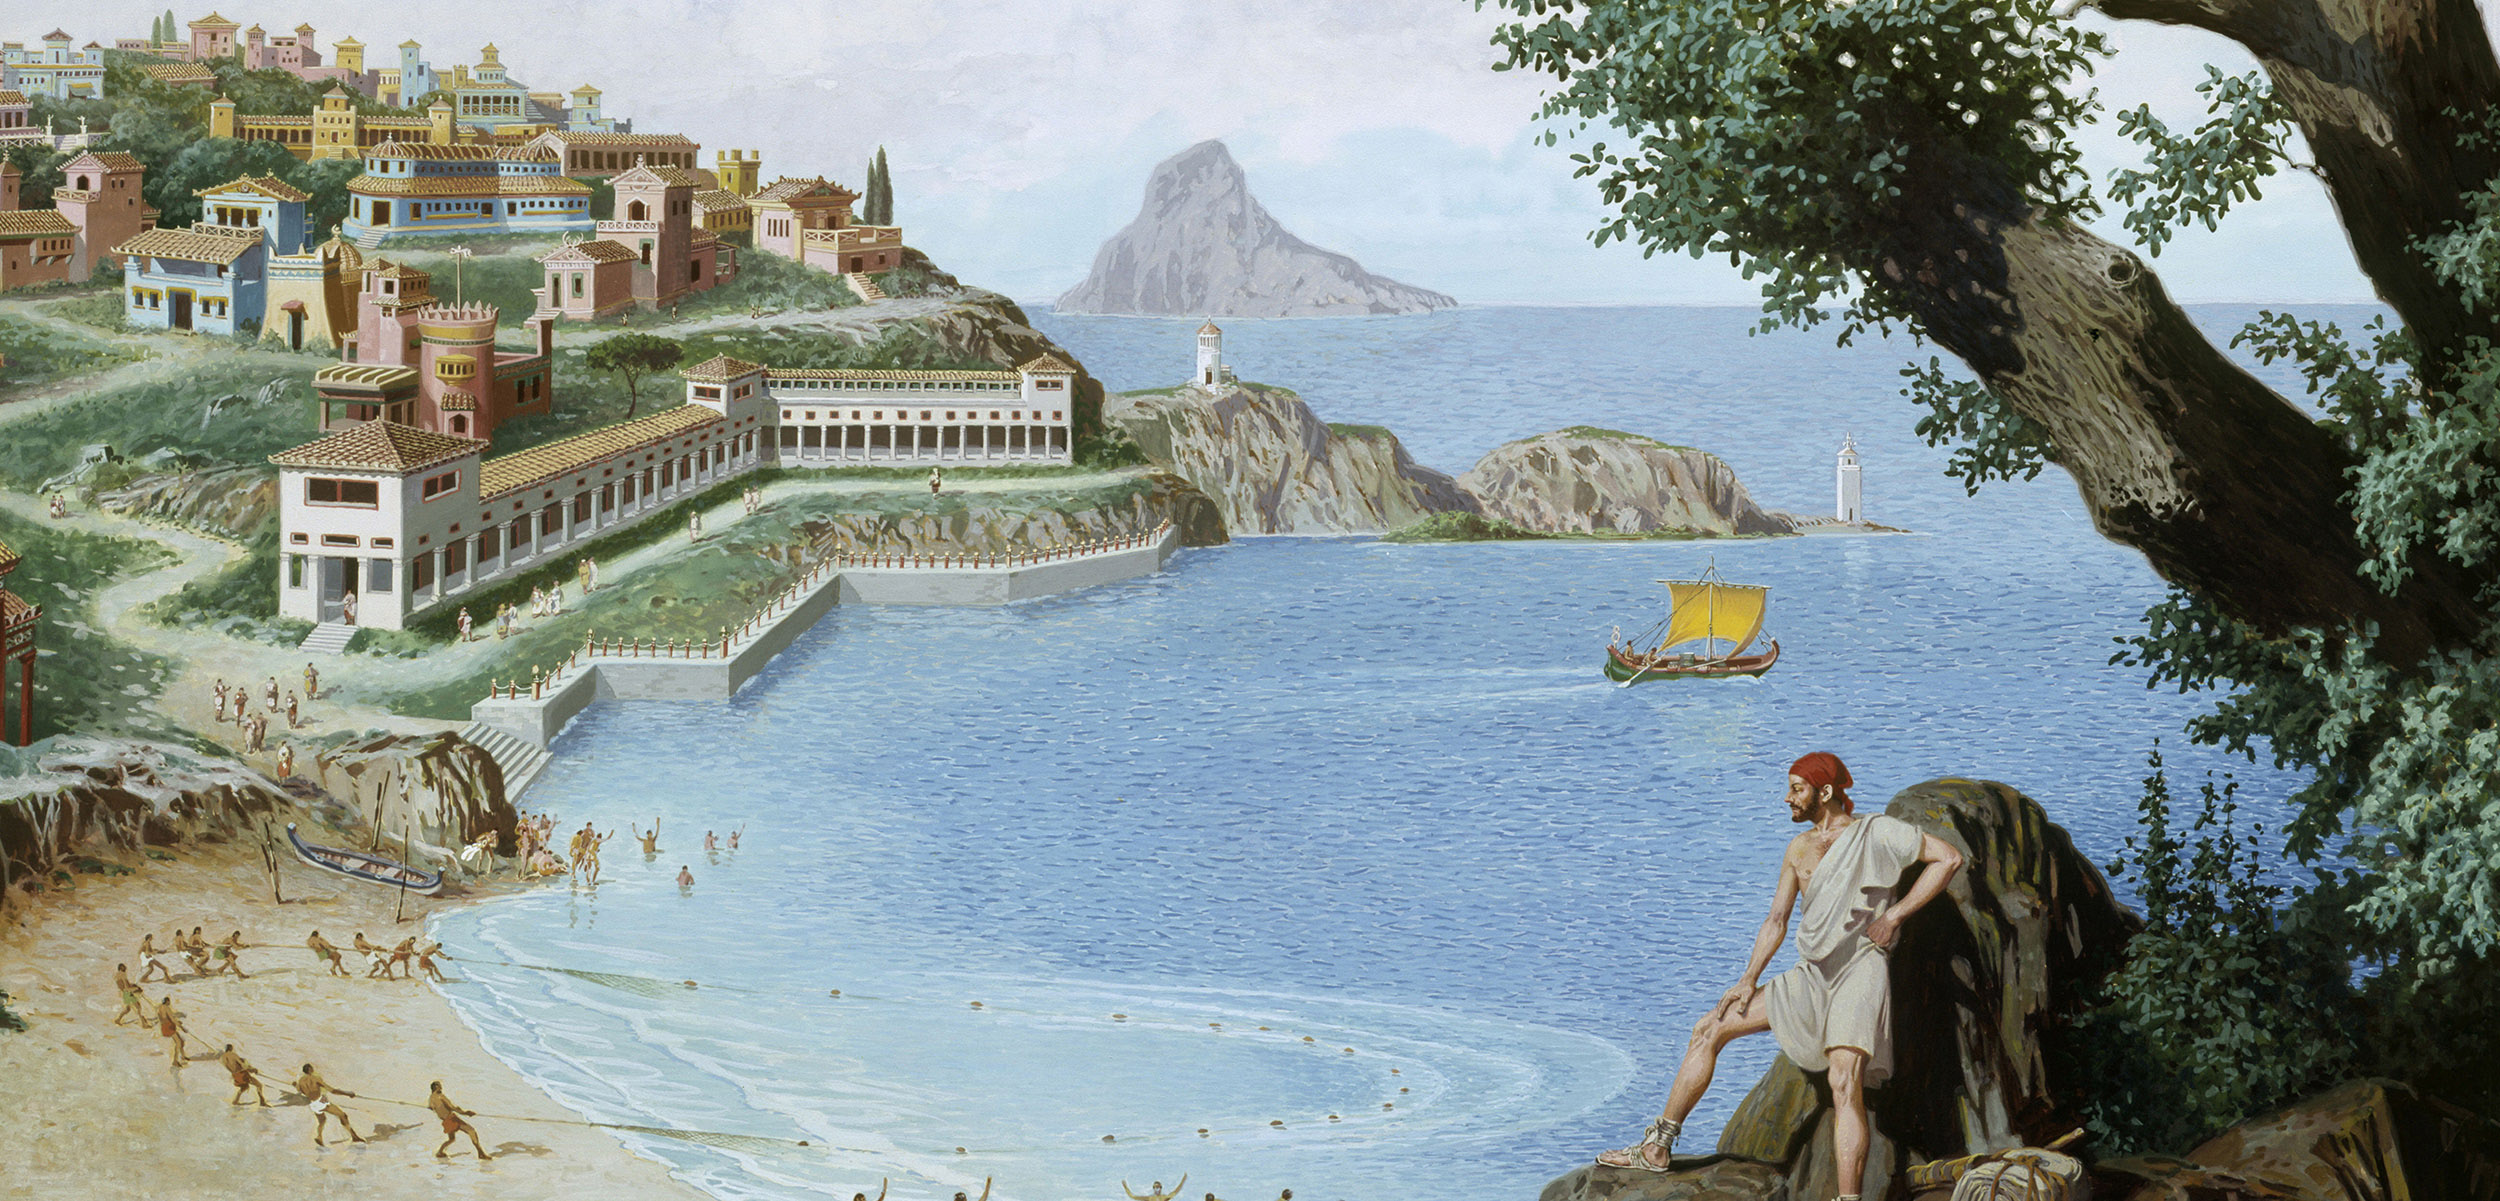 Ancient Roman fishers hauled in nets flashing with fish to cater to the high demand for the freshest seafood possible. The desire to capitalize on this hunger pitted the very rich against the working poor, sparking one of the world’s earliest-known battles for the coastline. Illustration by National Geographic Creative/Alamy Stock Photo